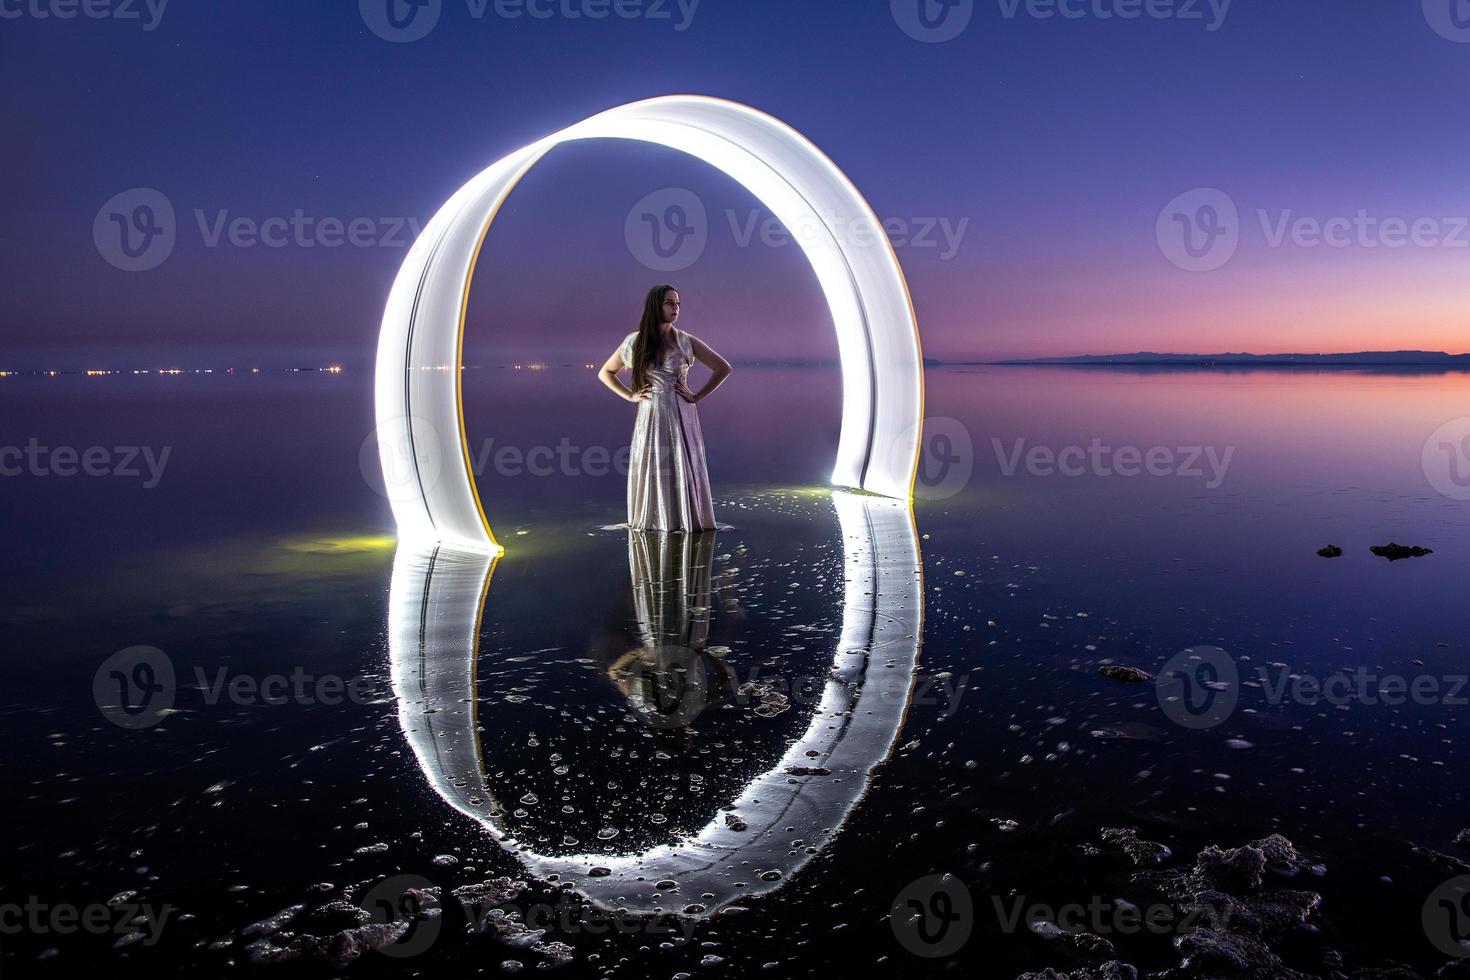 Light Painted Girl in the Salton Sea photo